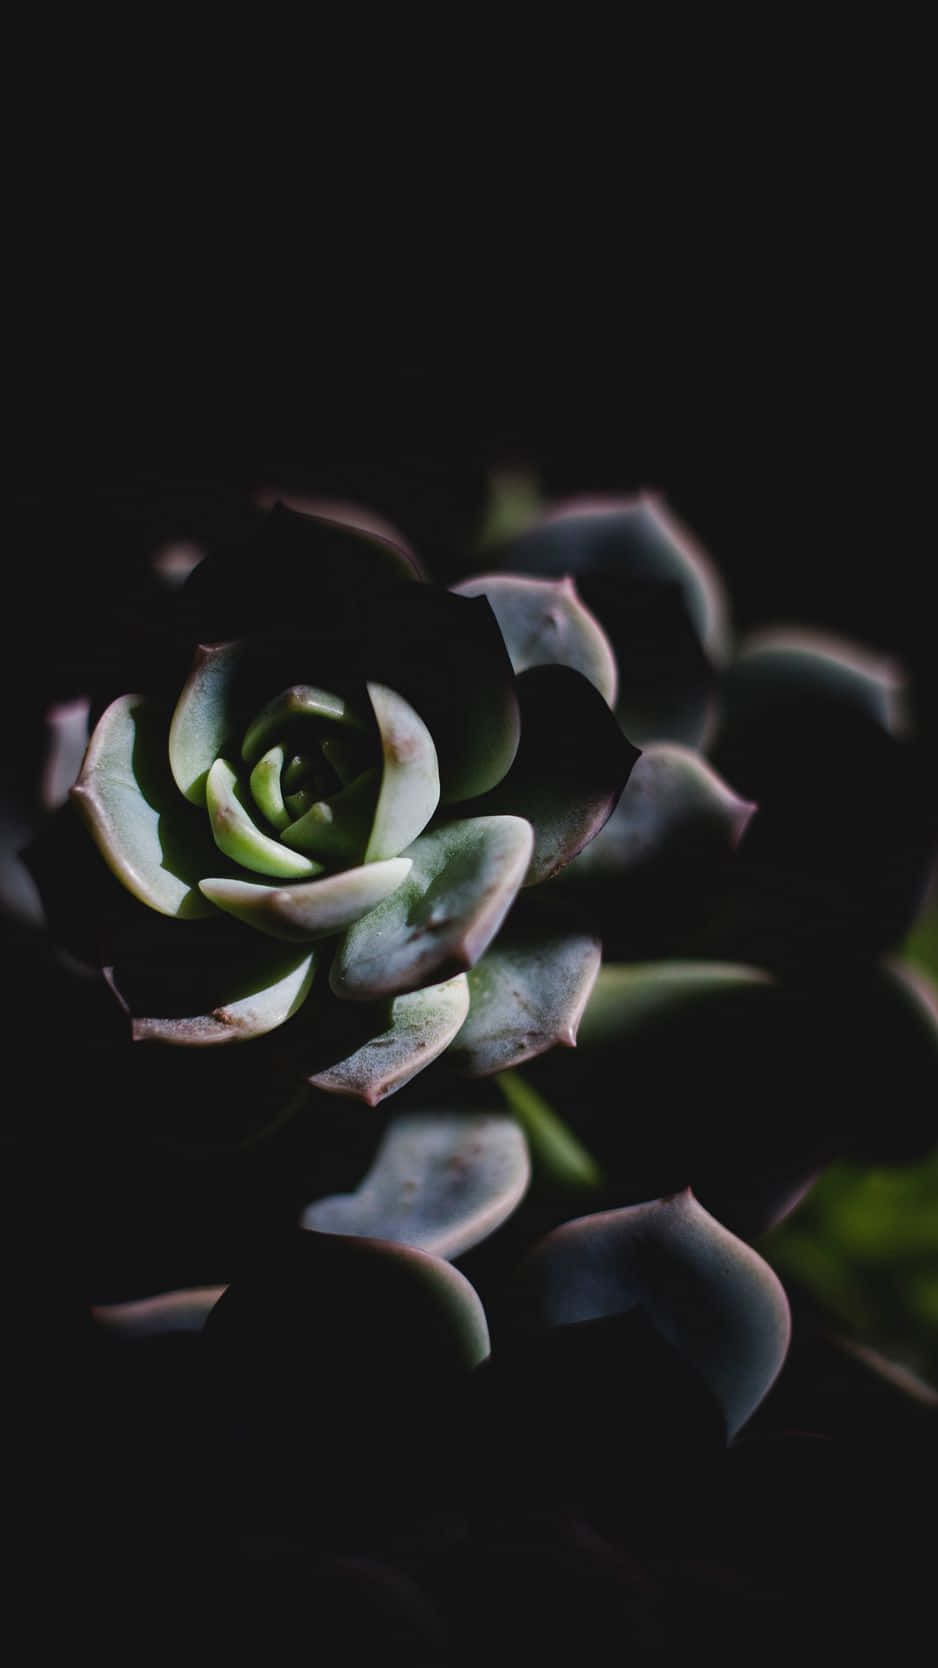 Add A Touch Of Life To Your Iphone With This Gorgeous Succulent Wallpaper. Wallpaper